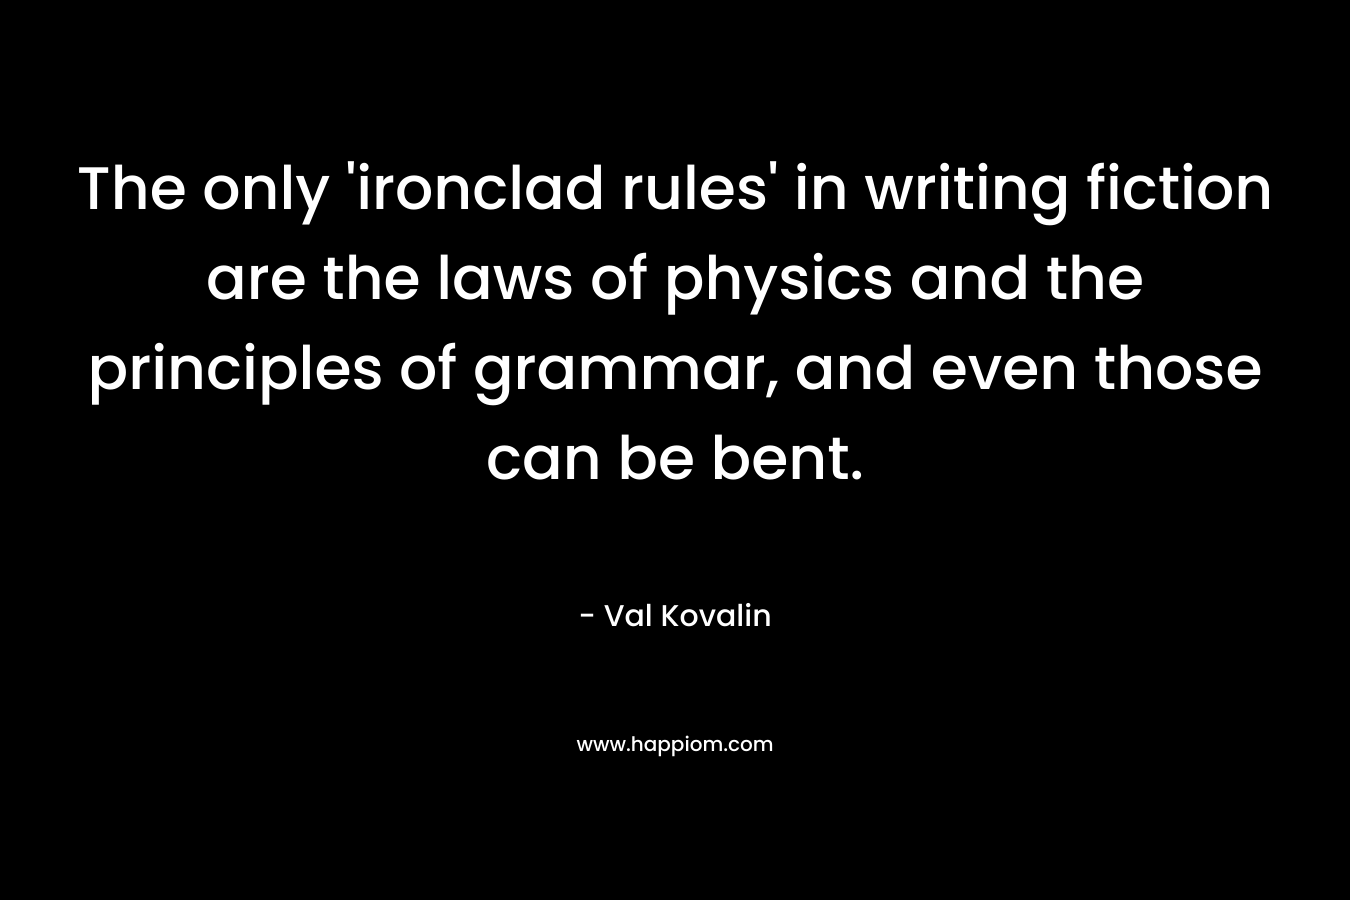 The only ‘ironclad rules’ in writing fiction are the laws of physics and the principles of grammar, and even those can be bent. – Val Kovalin